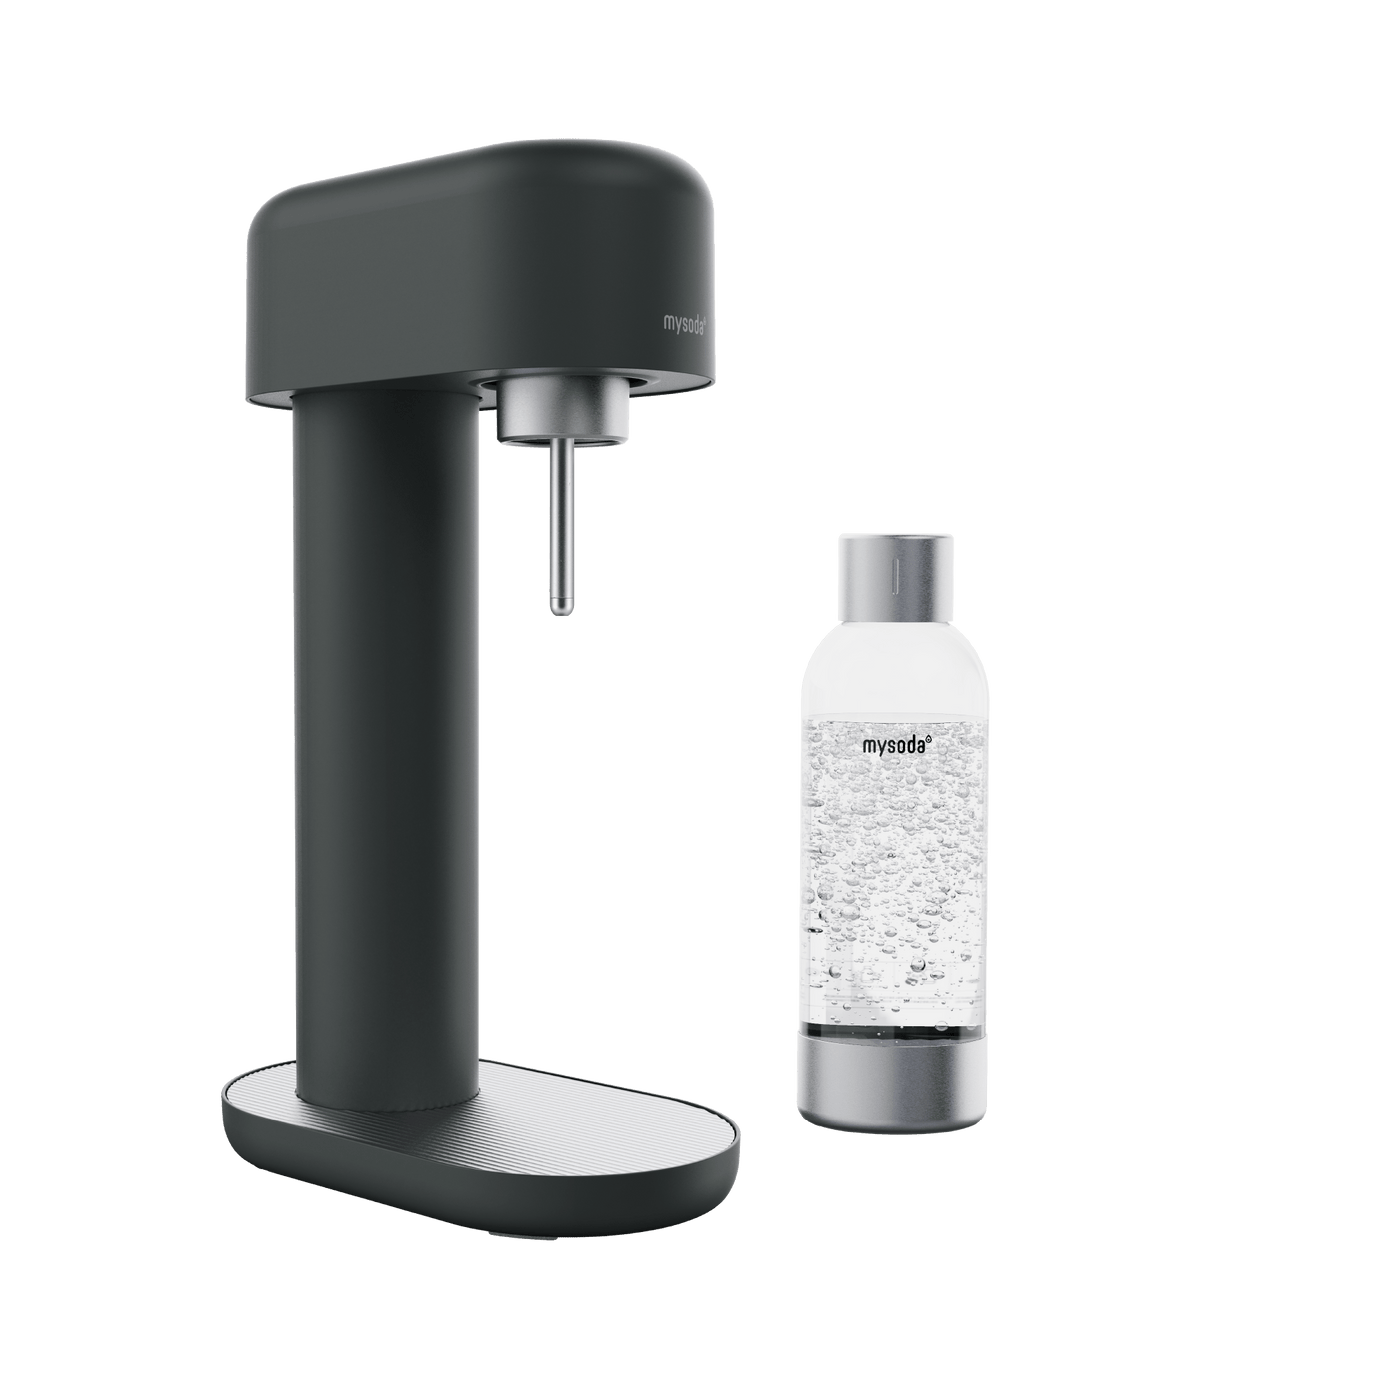 A black and silver Ruby 2 sparkling water maker and bottle#väri_black-silver